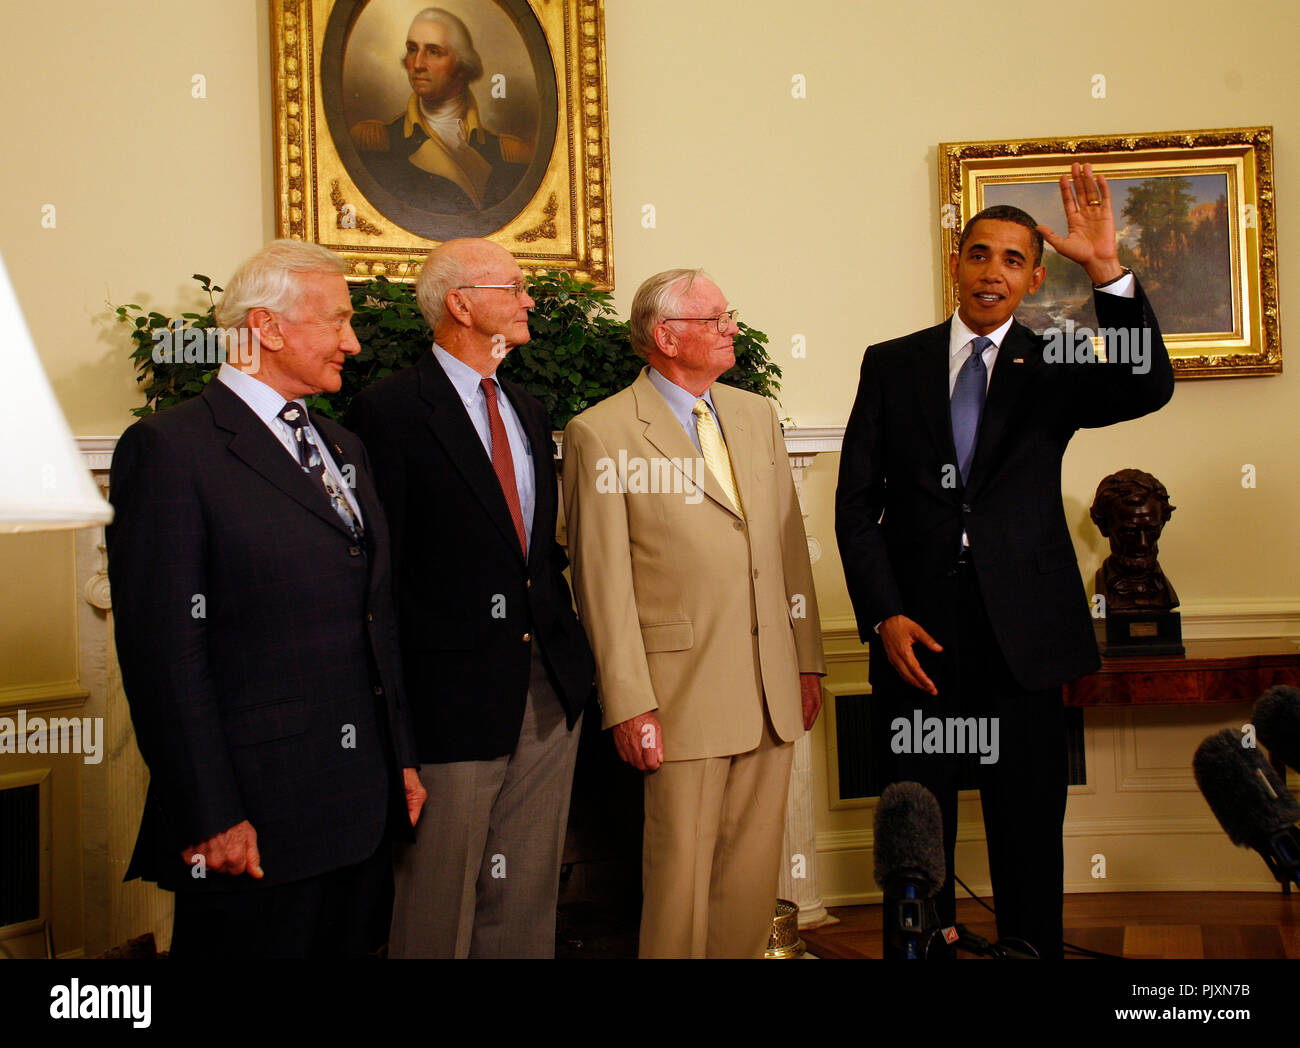 Washington, DC - July 20, 2009 -- United States President Barack Obama meets with Apollo 11 crew members (l-r) Edwin Eugene 'Buzz' Aldrin, Jr., Michael Collins, and Neil Armstrong in the Oval Office of the White House on the 40th anniversary of the astronauts' lunar landing, Washington, DC, Monday, July 20, 2009. .Credit: Martin H. Simon / Pool via CNP /MediaPunch Stock Photo